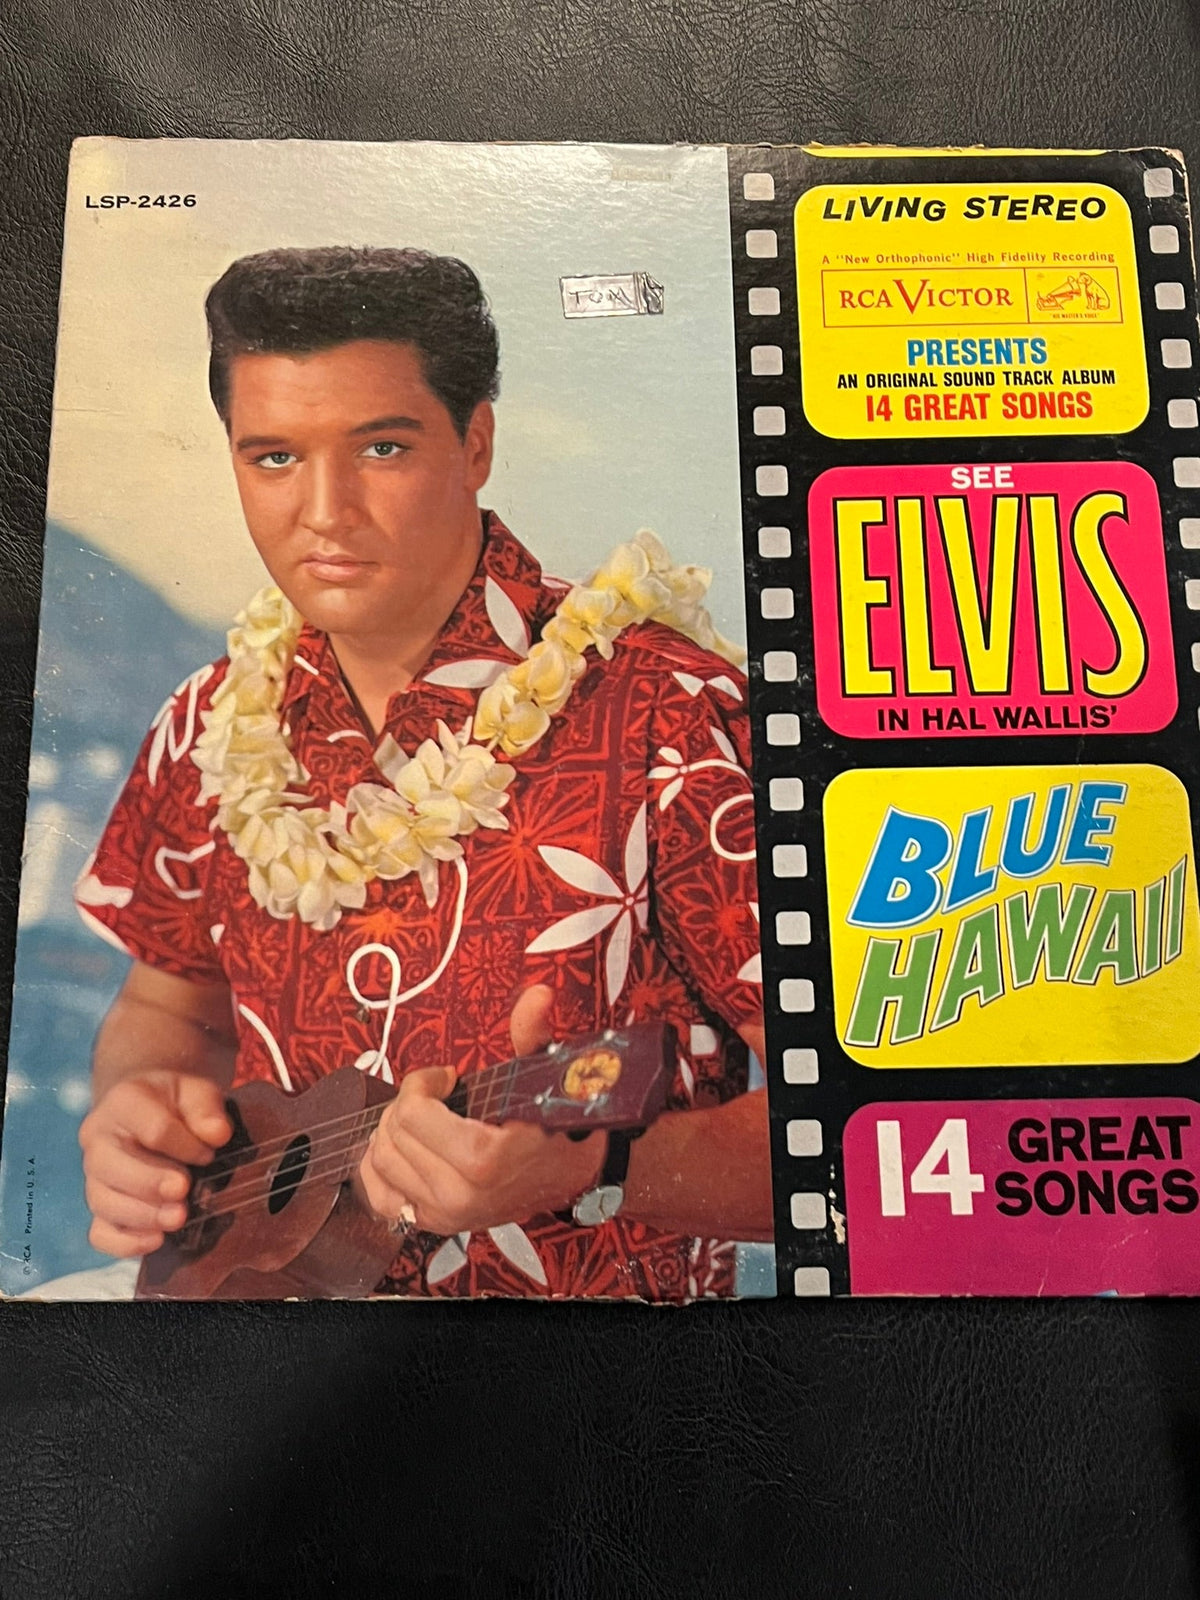 Sound Track from Blue Hawaii